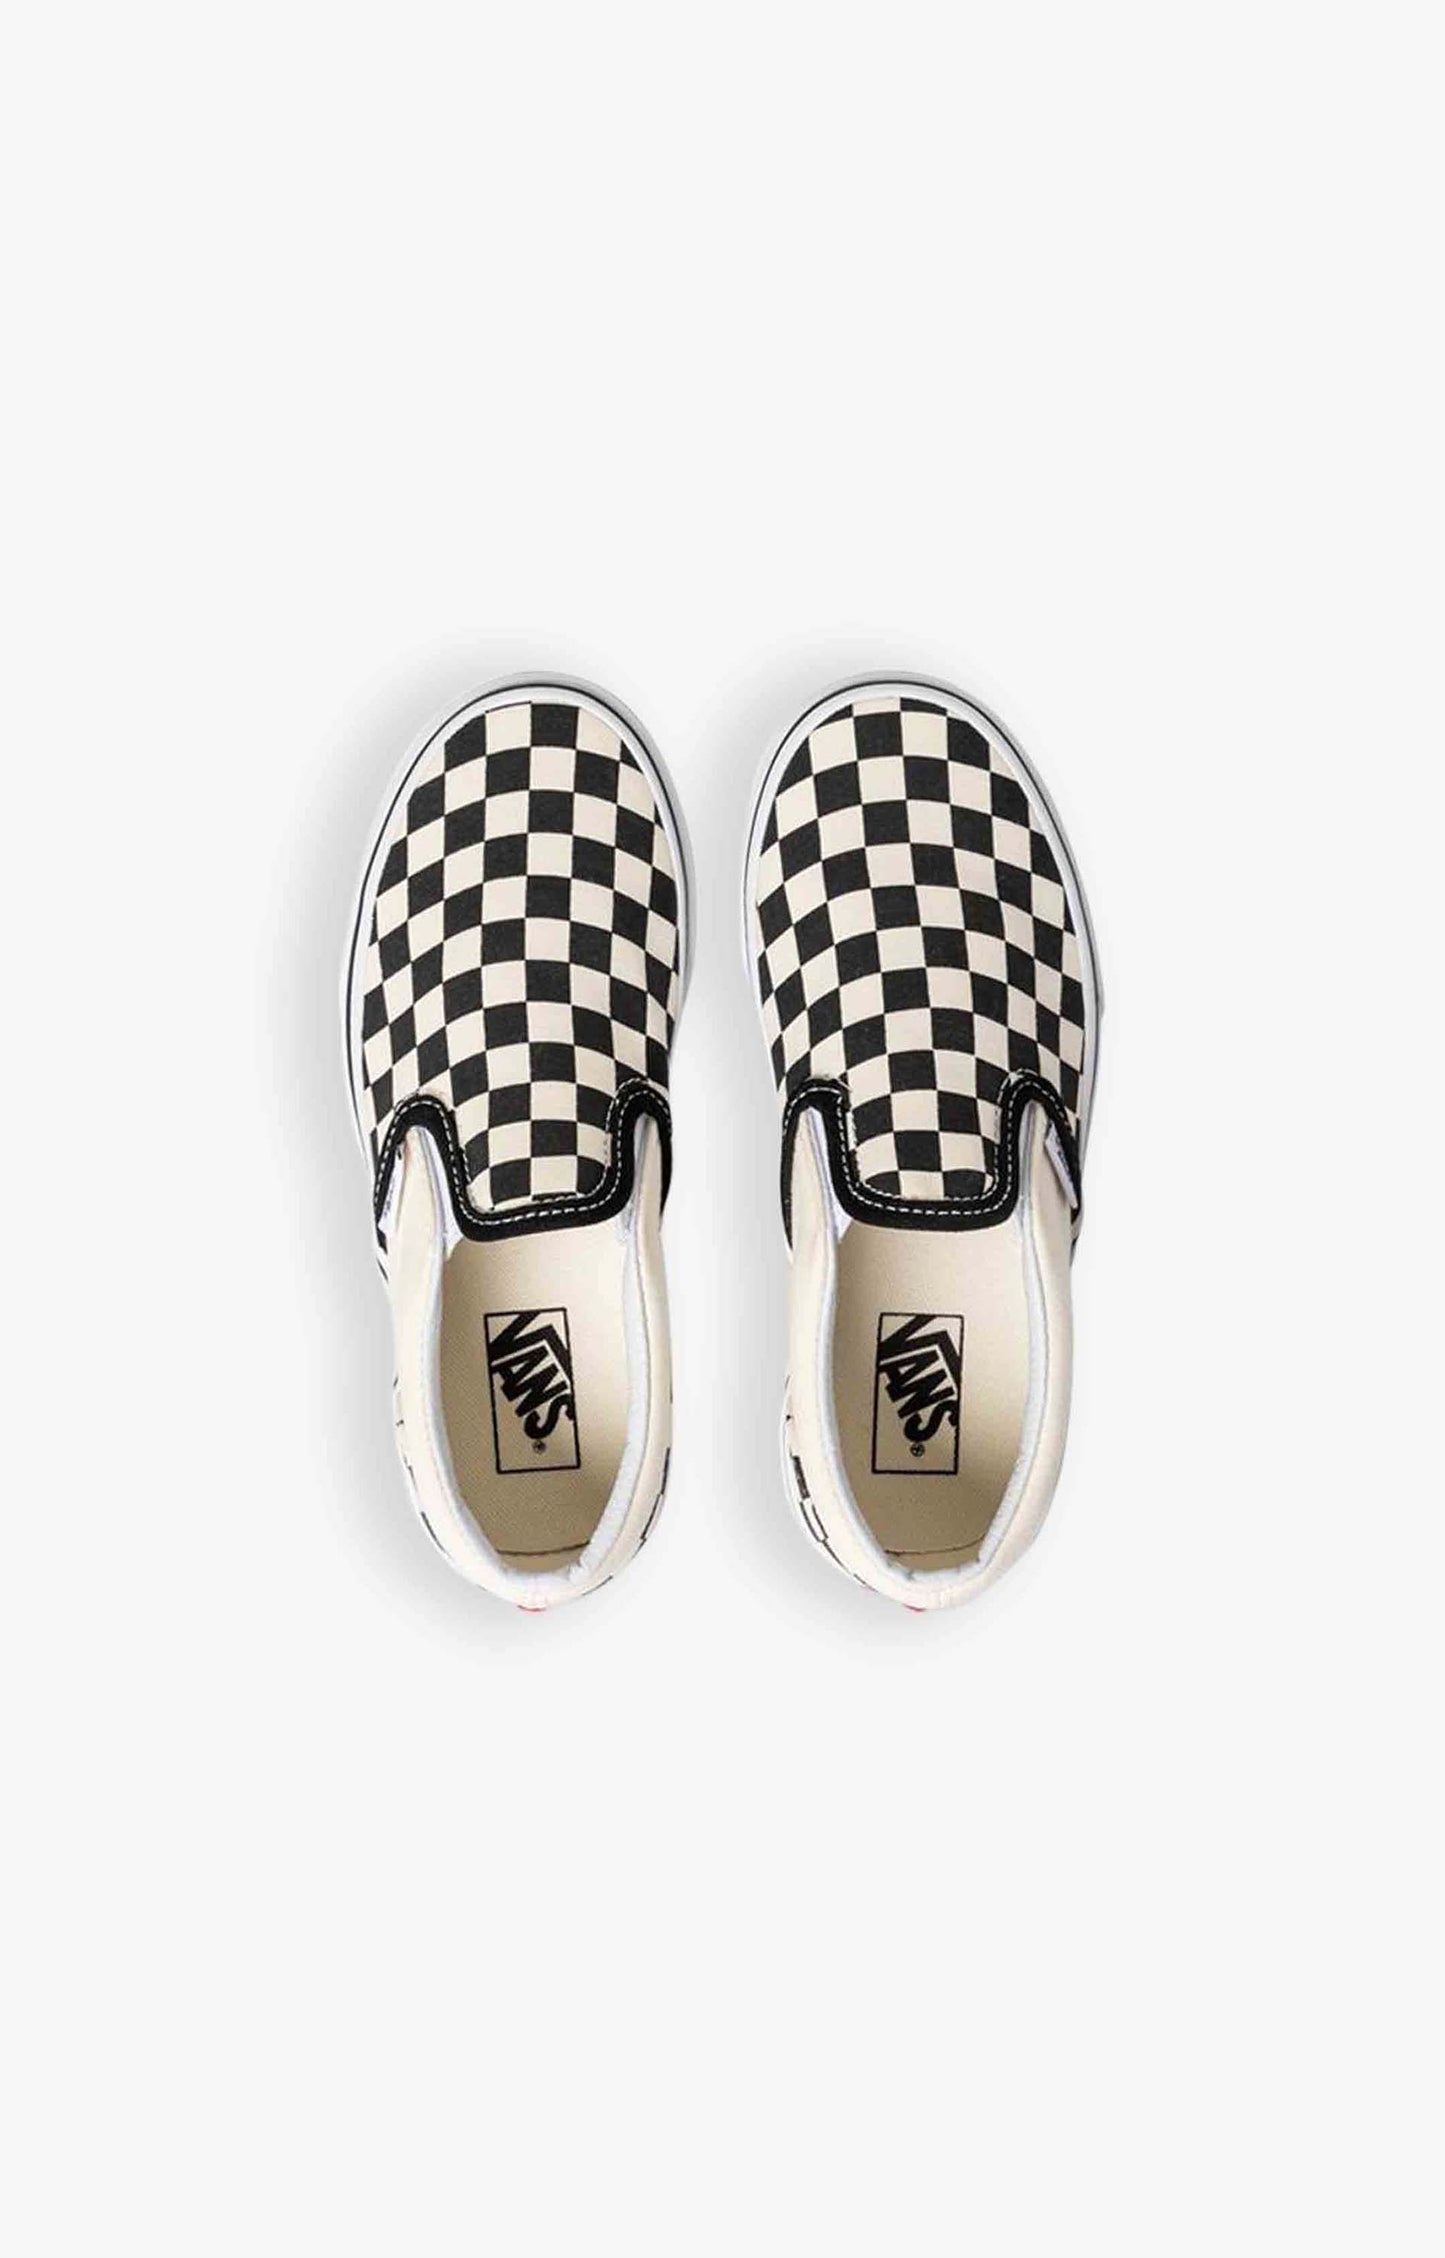 Vans Kids Classic Slip-On Shoes, Checkerboard